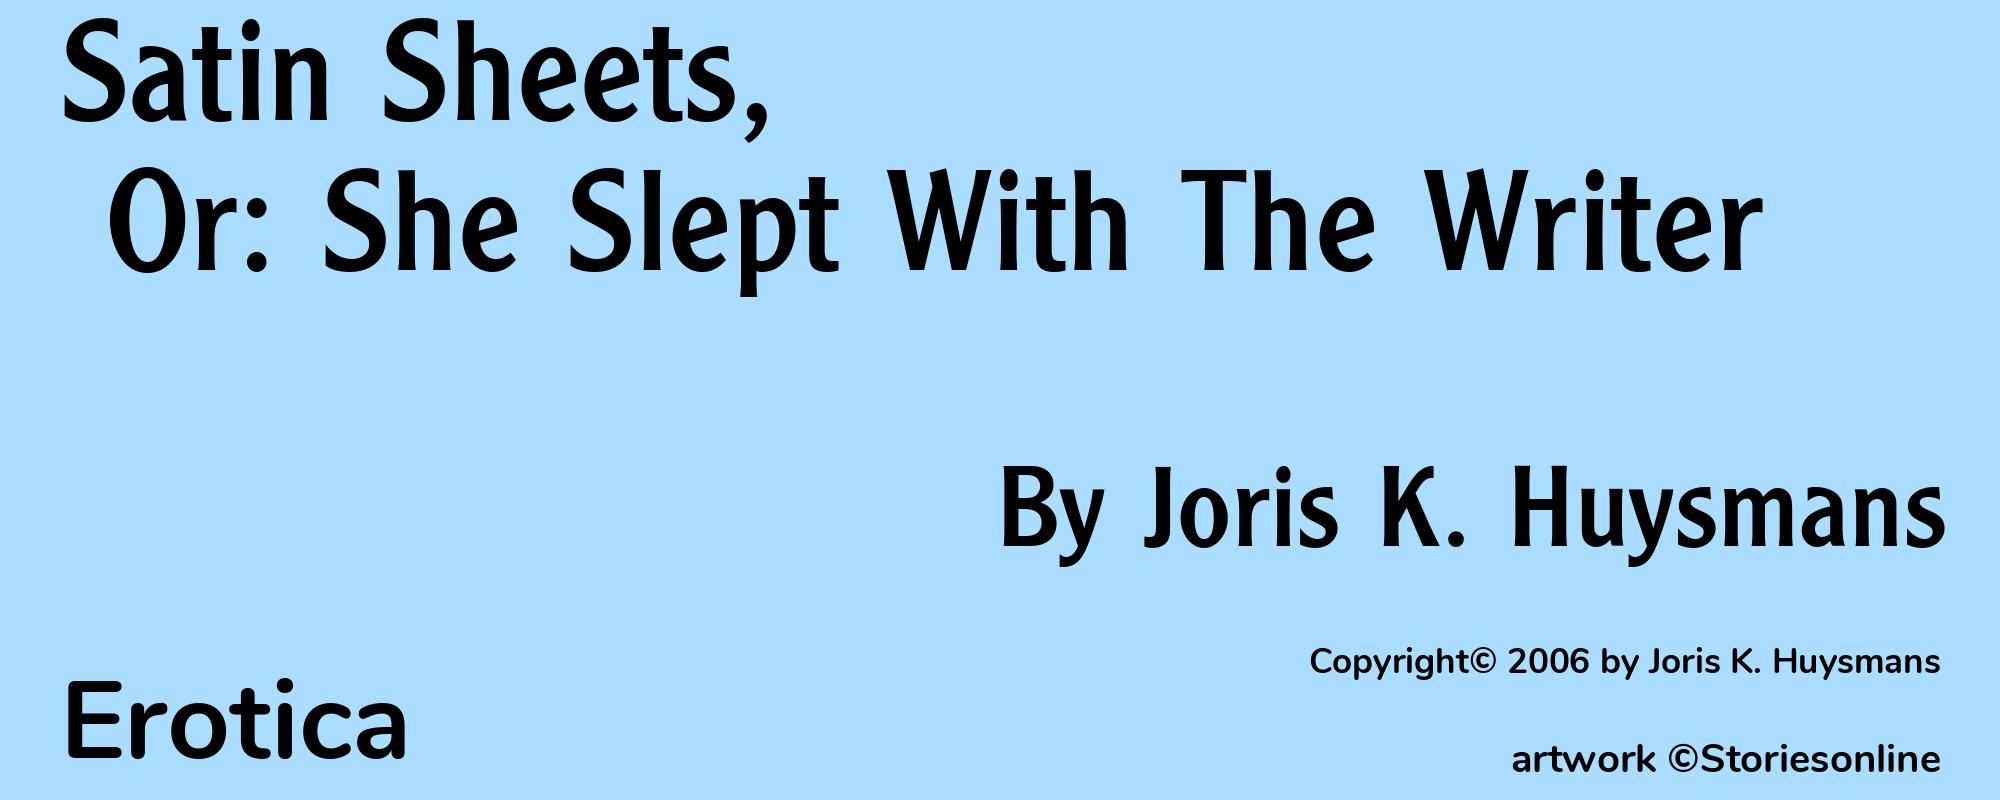 Satin Sheets, Or: She Slept With The Writer - Cover